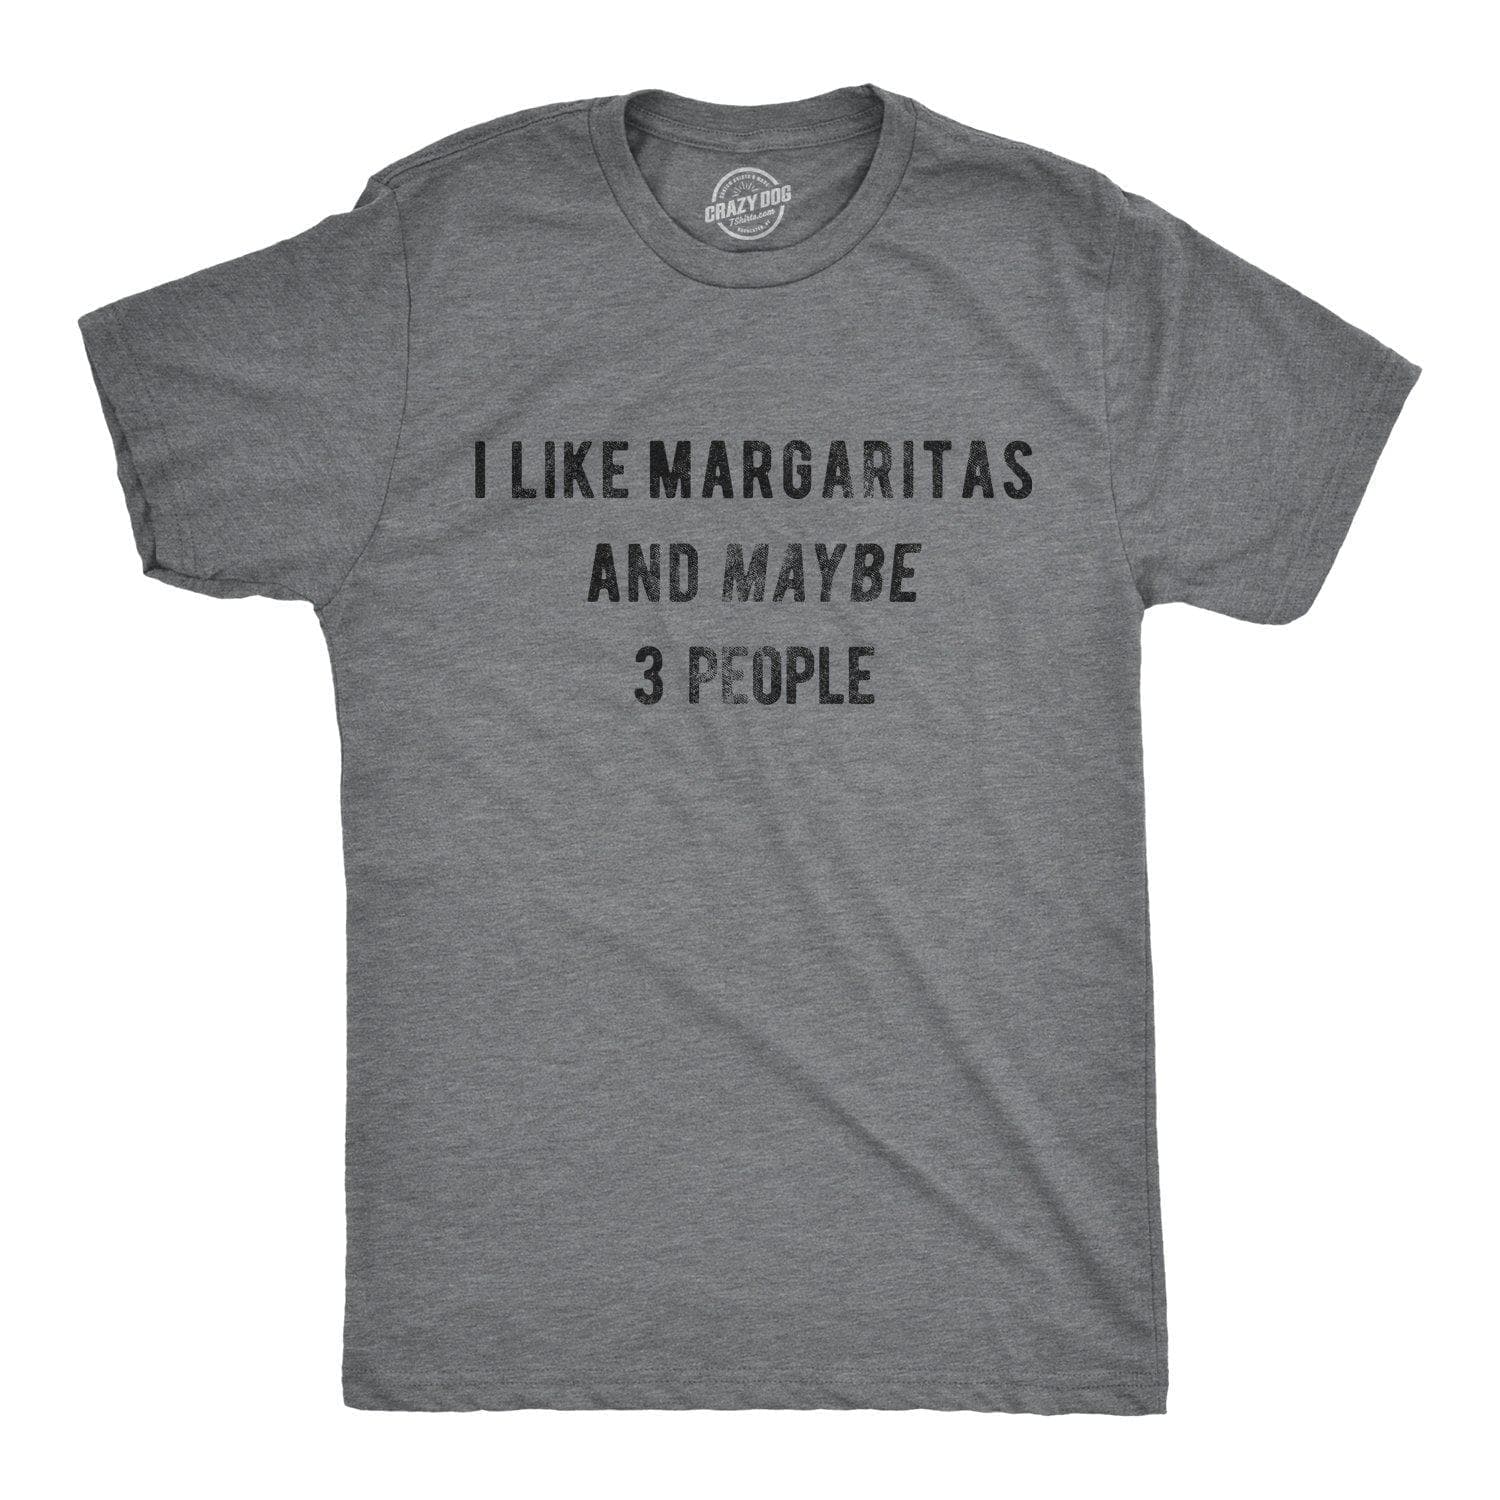 I Like Margaritas And Maybe 3 People Men's Tshirt  -  Crazy Dog T-Shirts